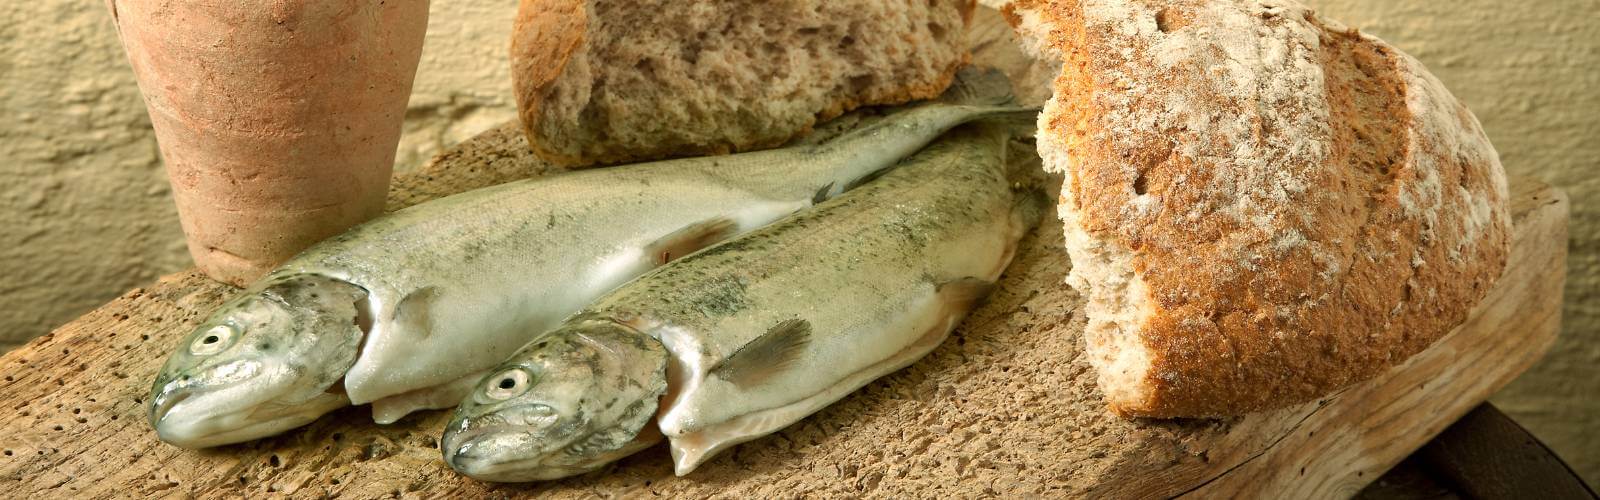 Fish and Bread